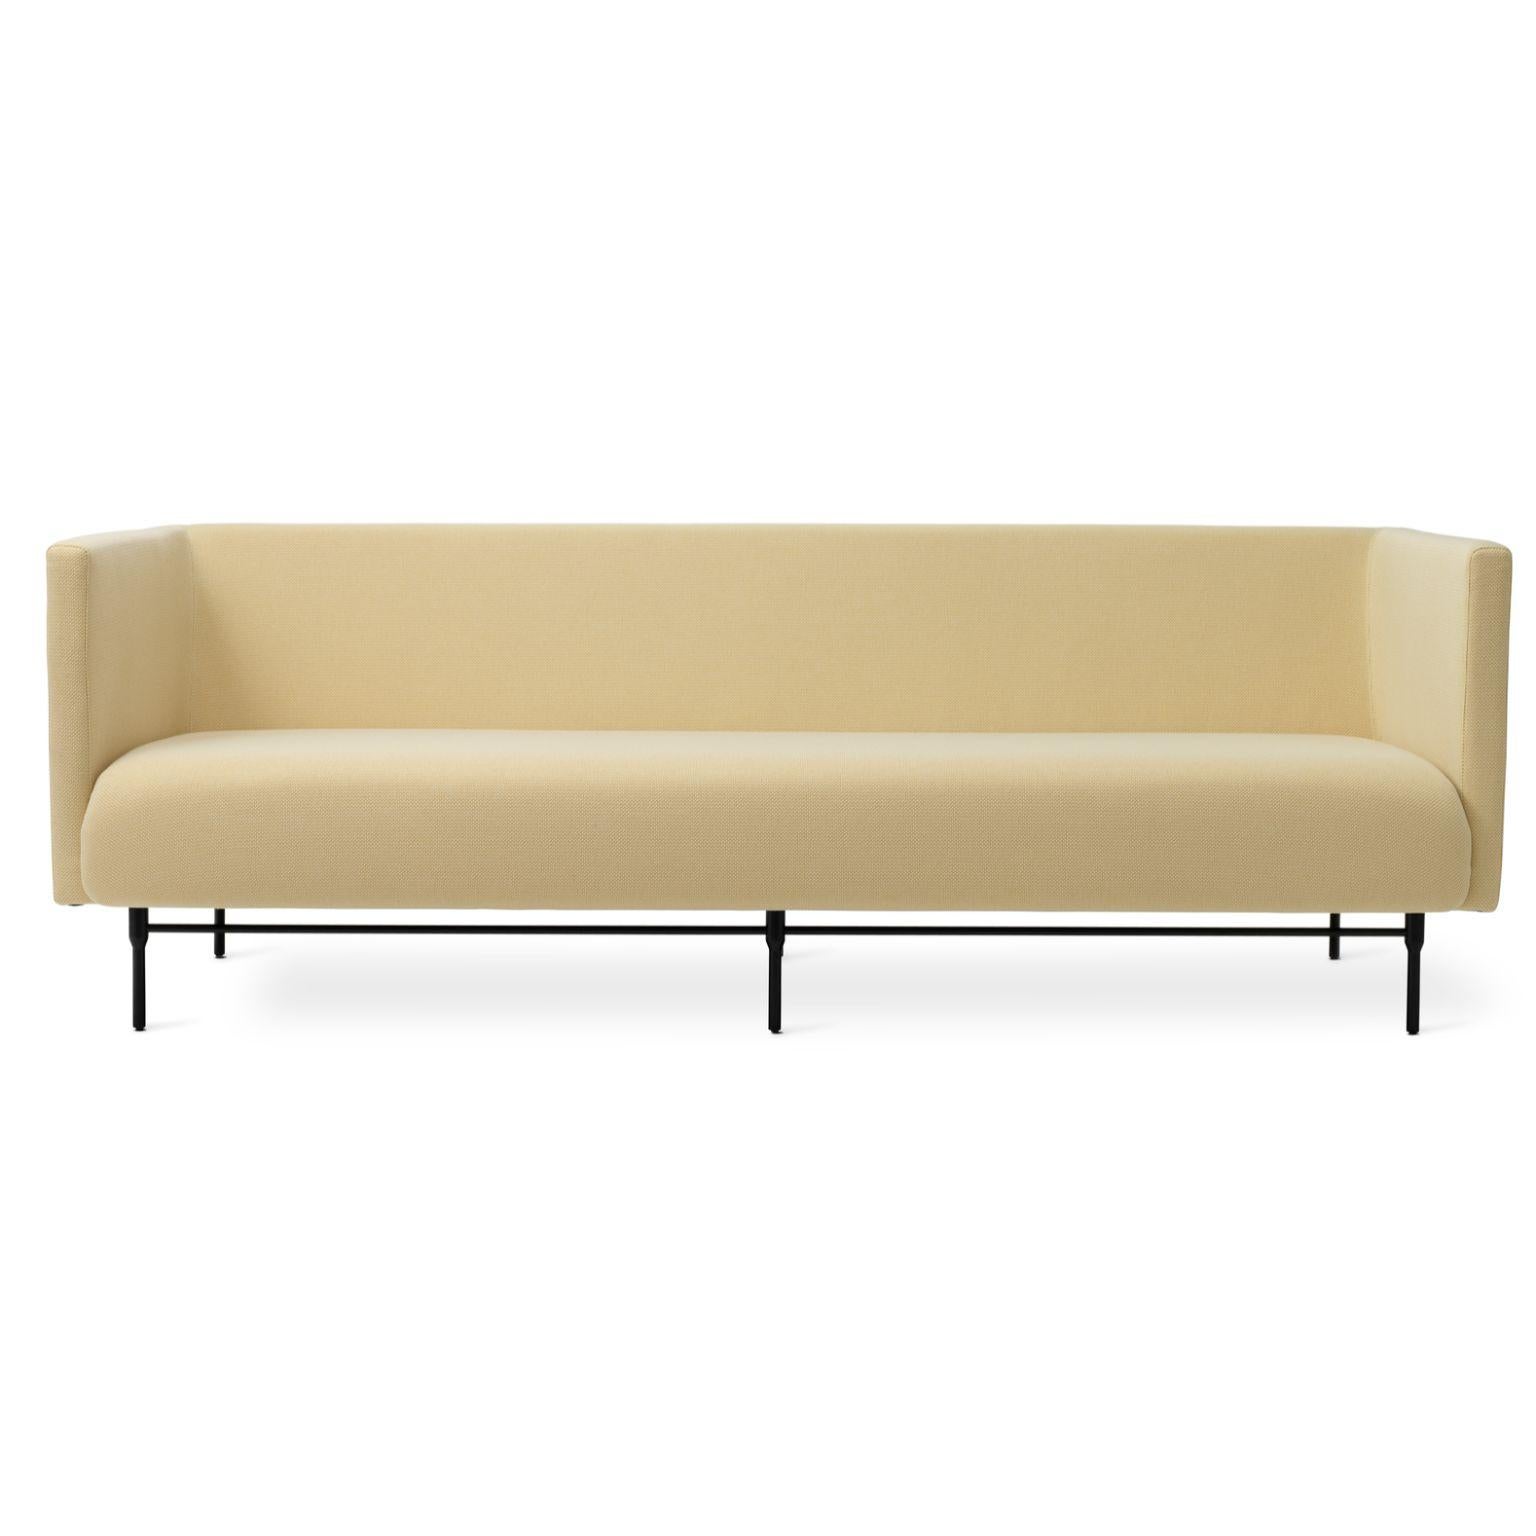 Galore 3 Seater Daffodil by Warm Nordic
Dimensions: D222 x W83 x H 76 cm
Material: Textile upholstery, Powder coated black steel legs, Wooden frame, foam, spring system.
Weight: 62 kg
Also available in different colours and finishes. Please